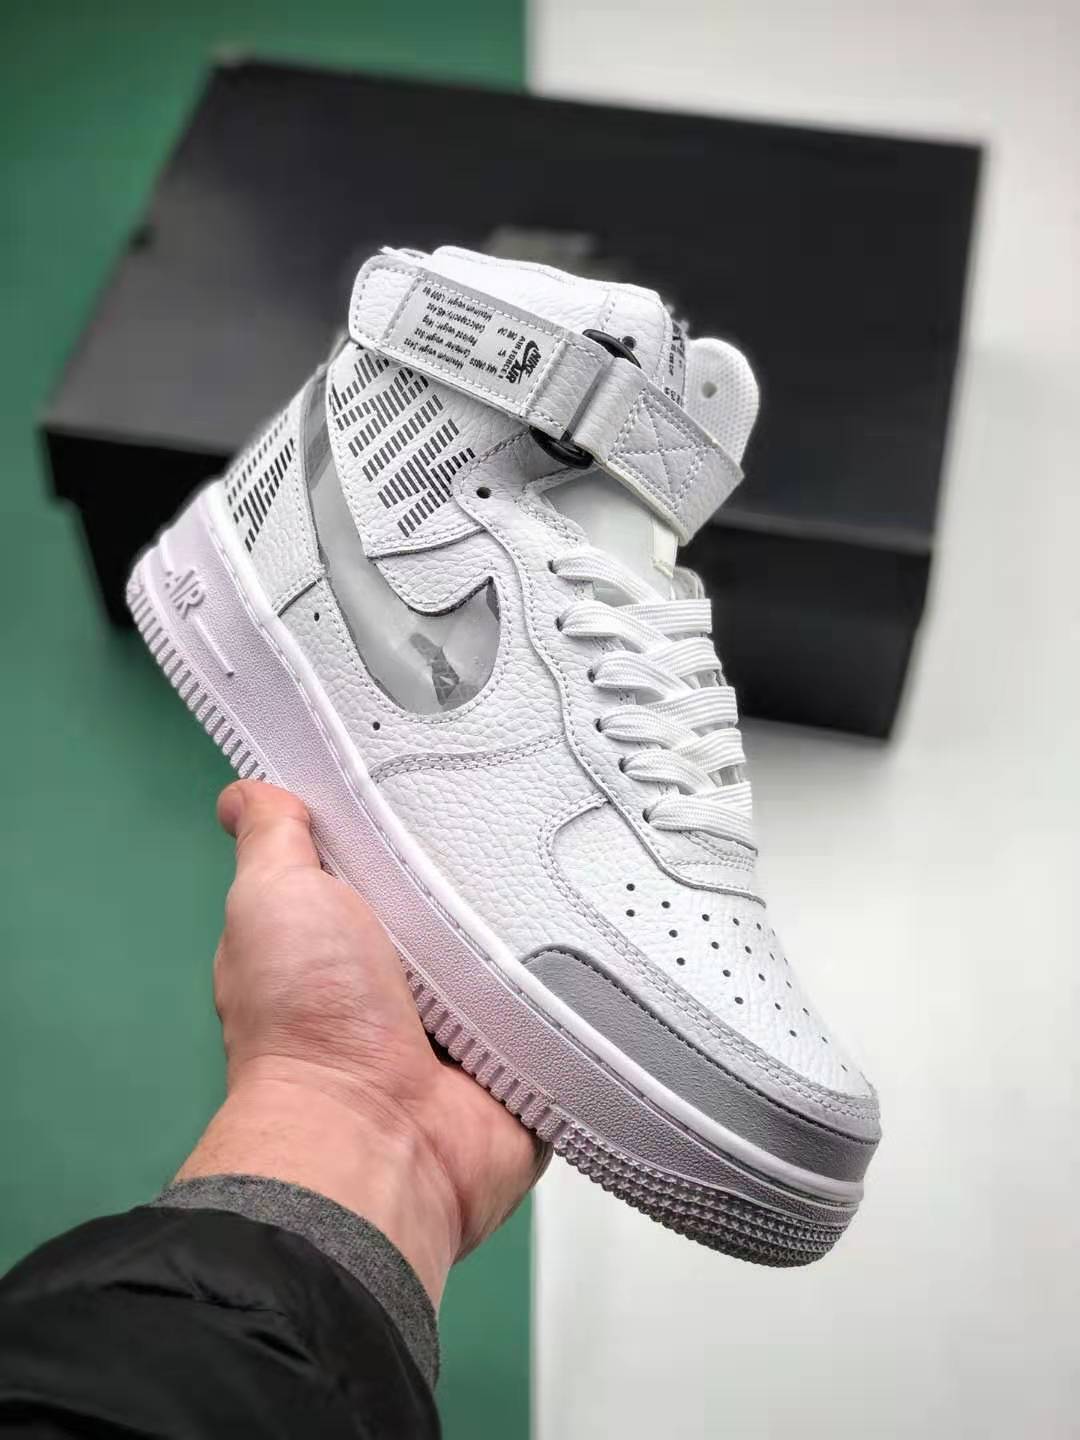 Nike Air Force 1 High Under Construction White CQ0449-100 - Supreme Style and Urban Flair.